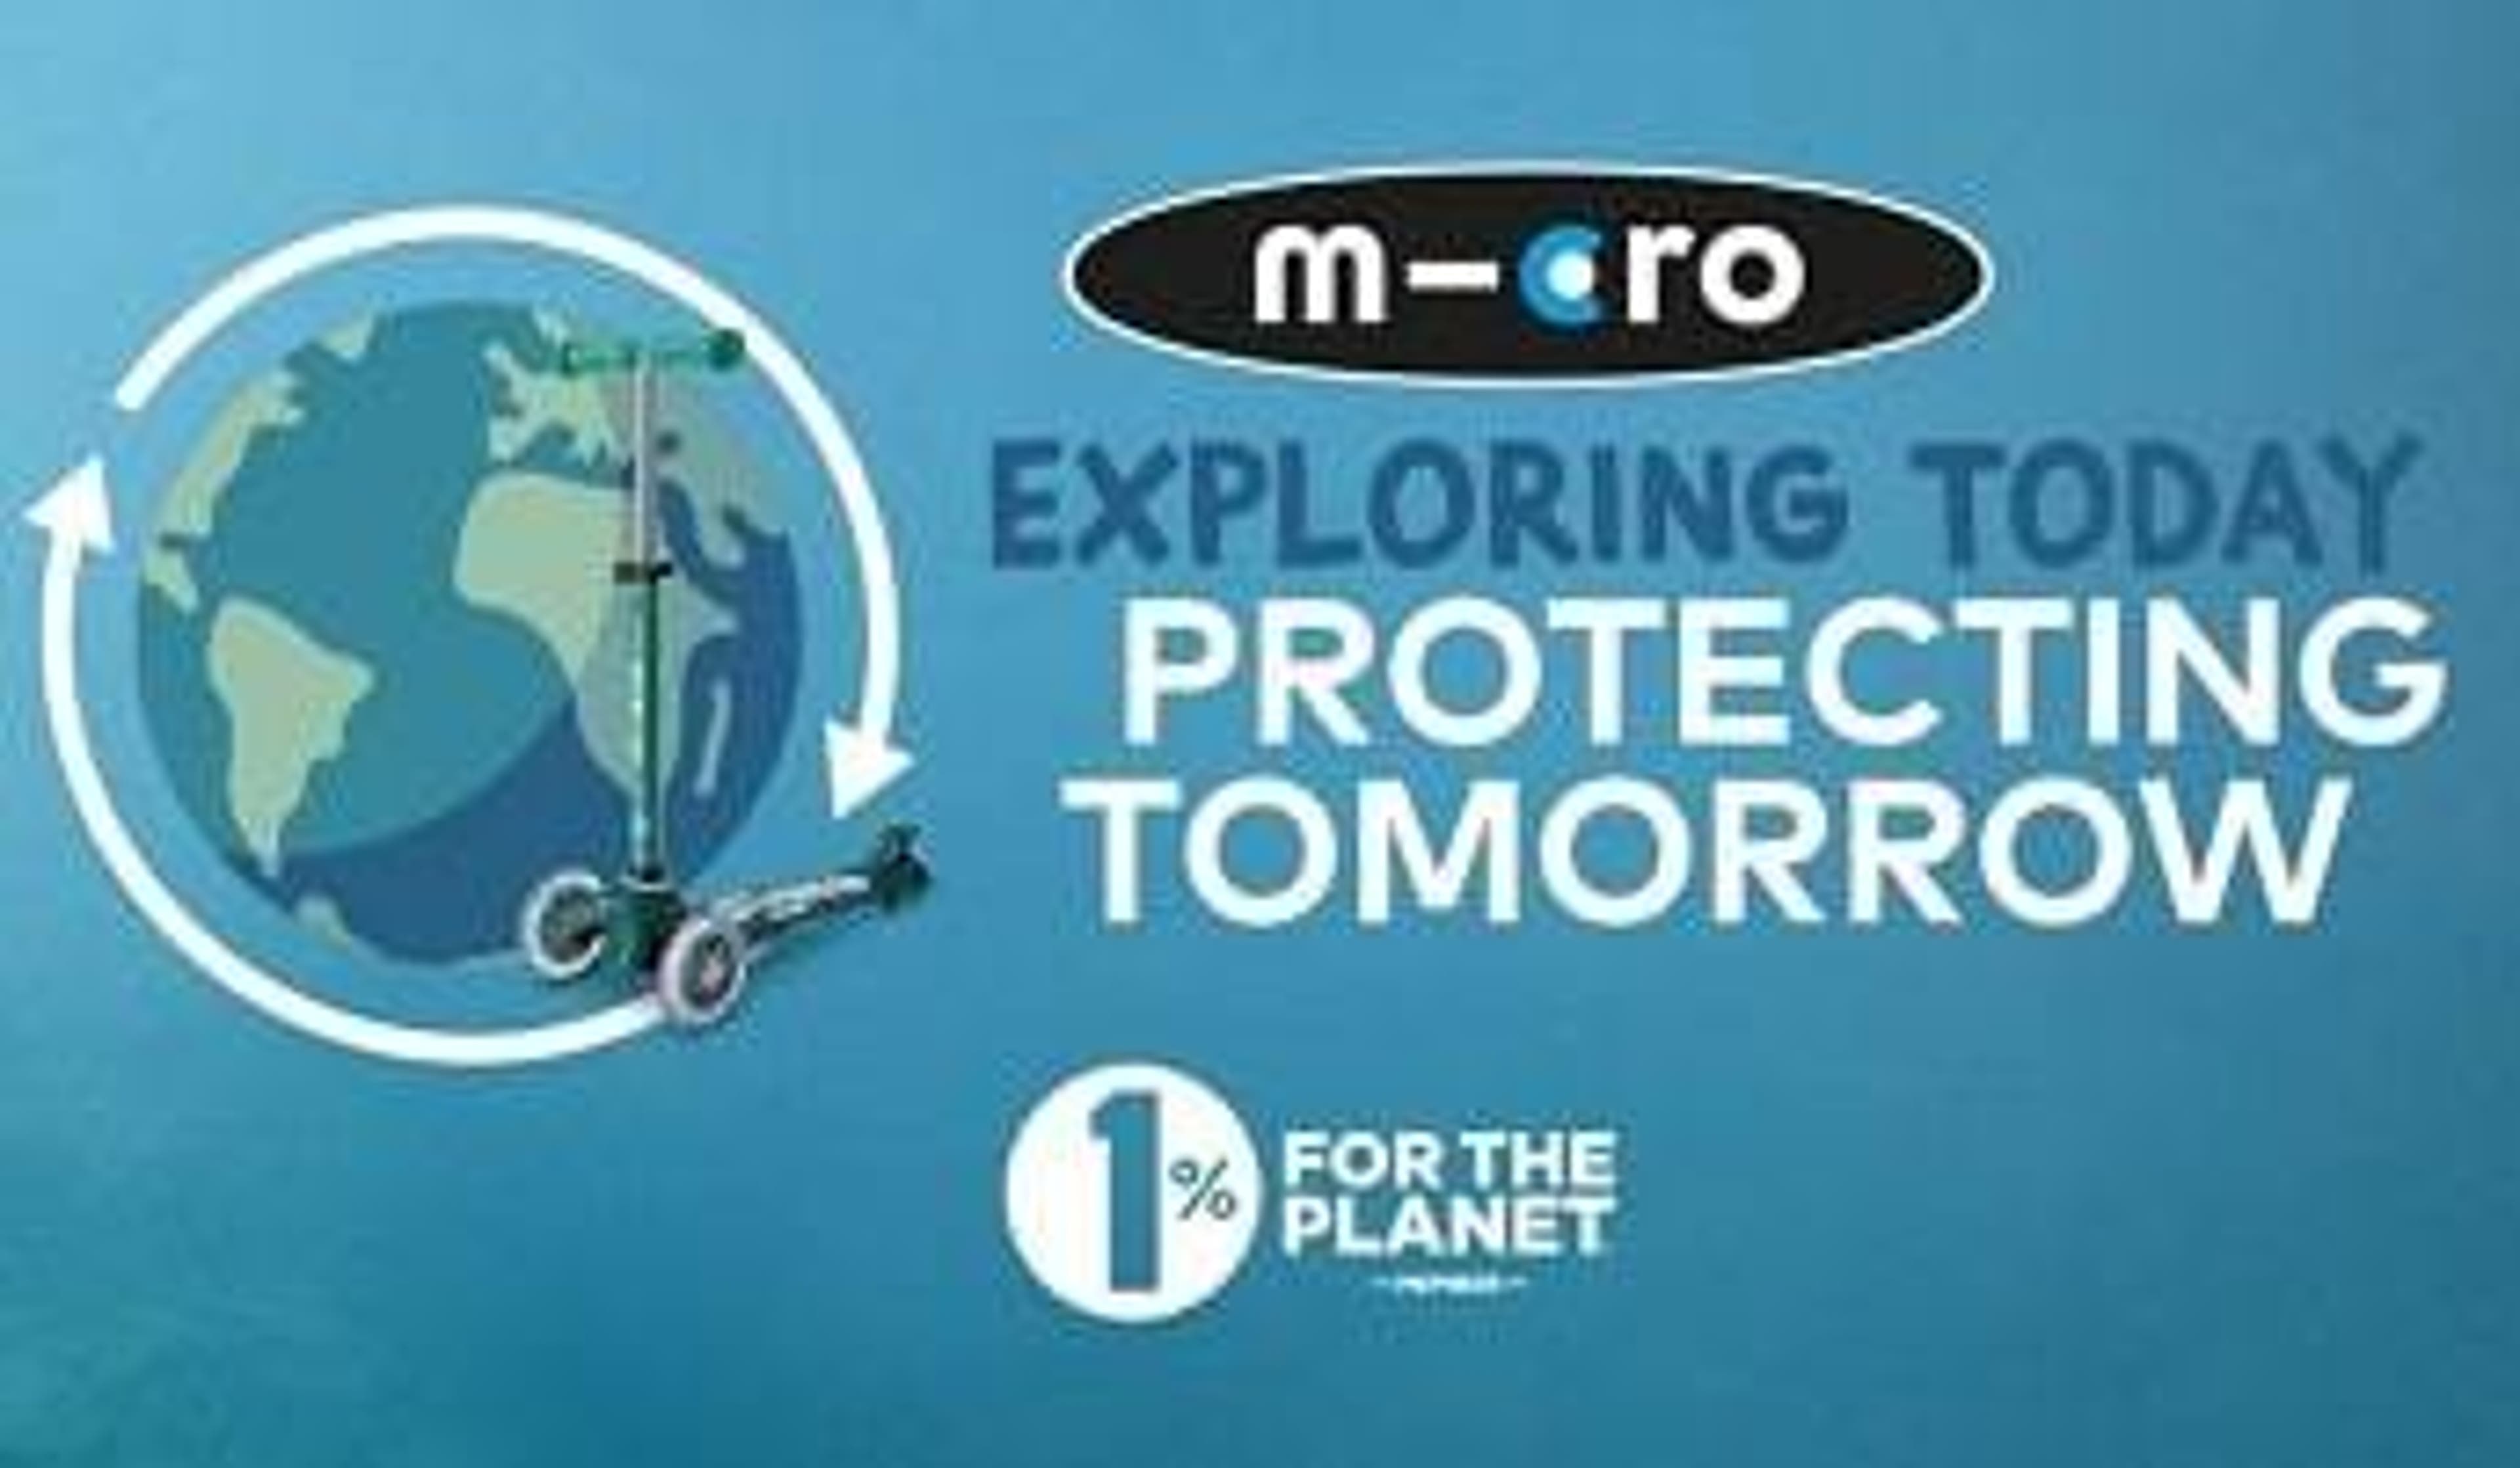  The Micro Scooters Sustainability Promise 